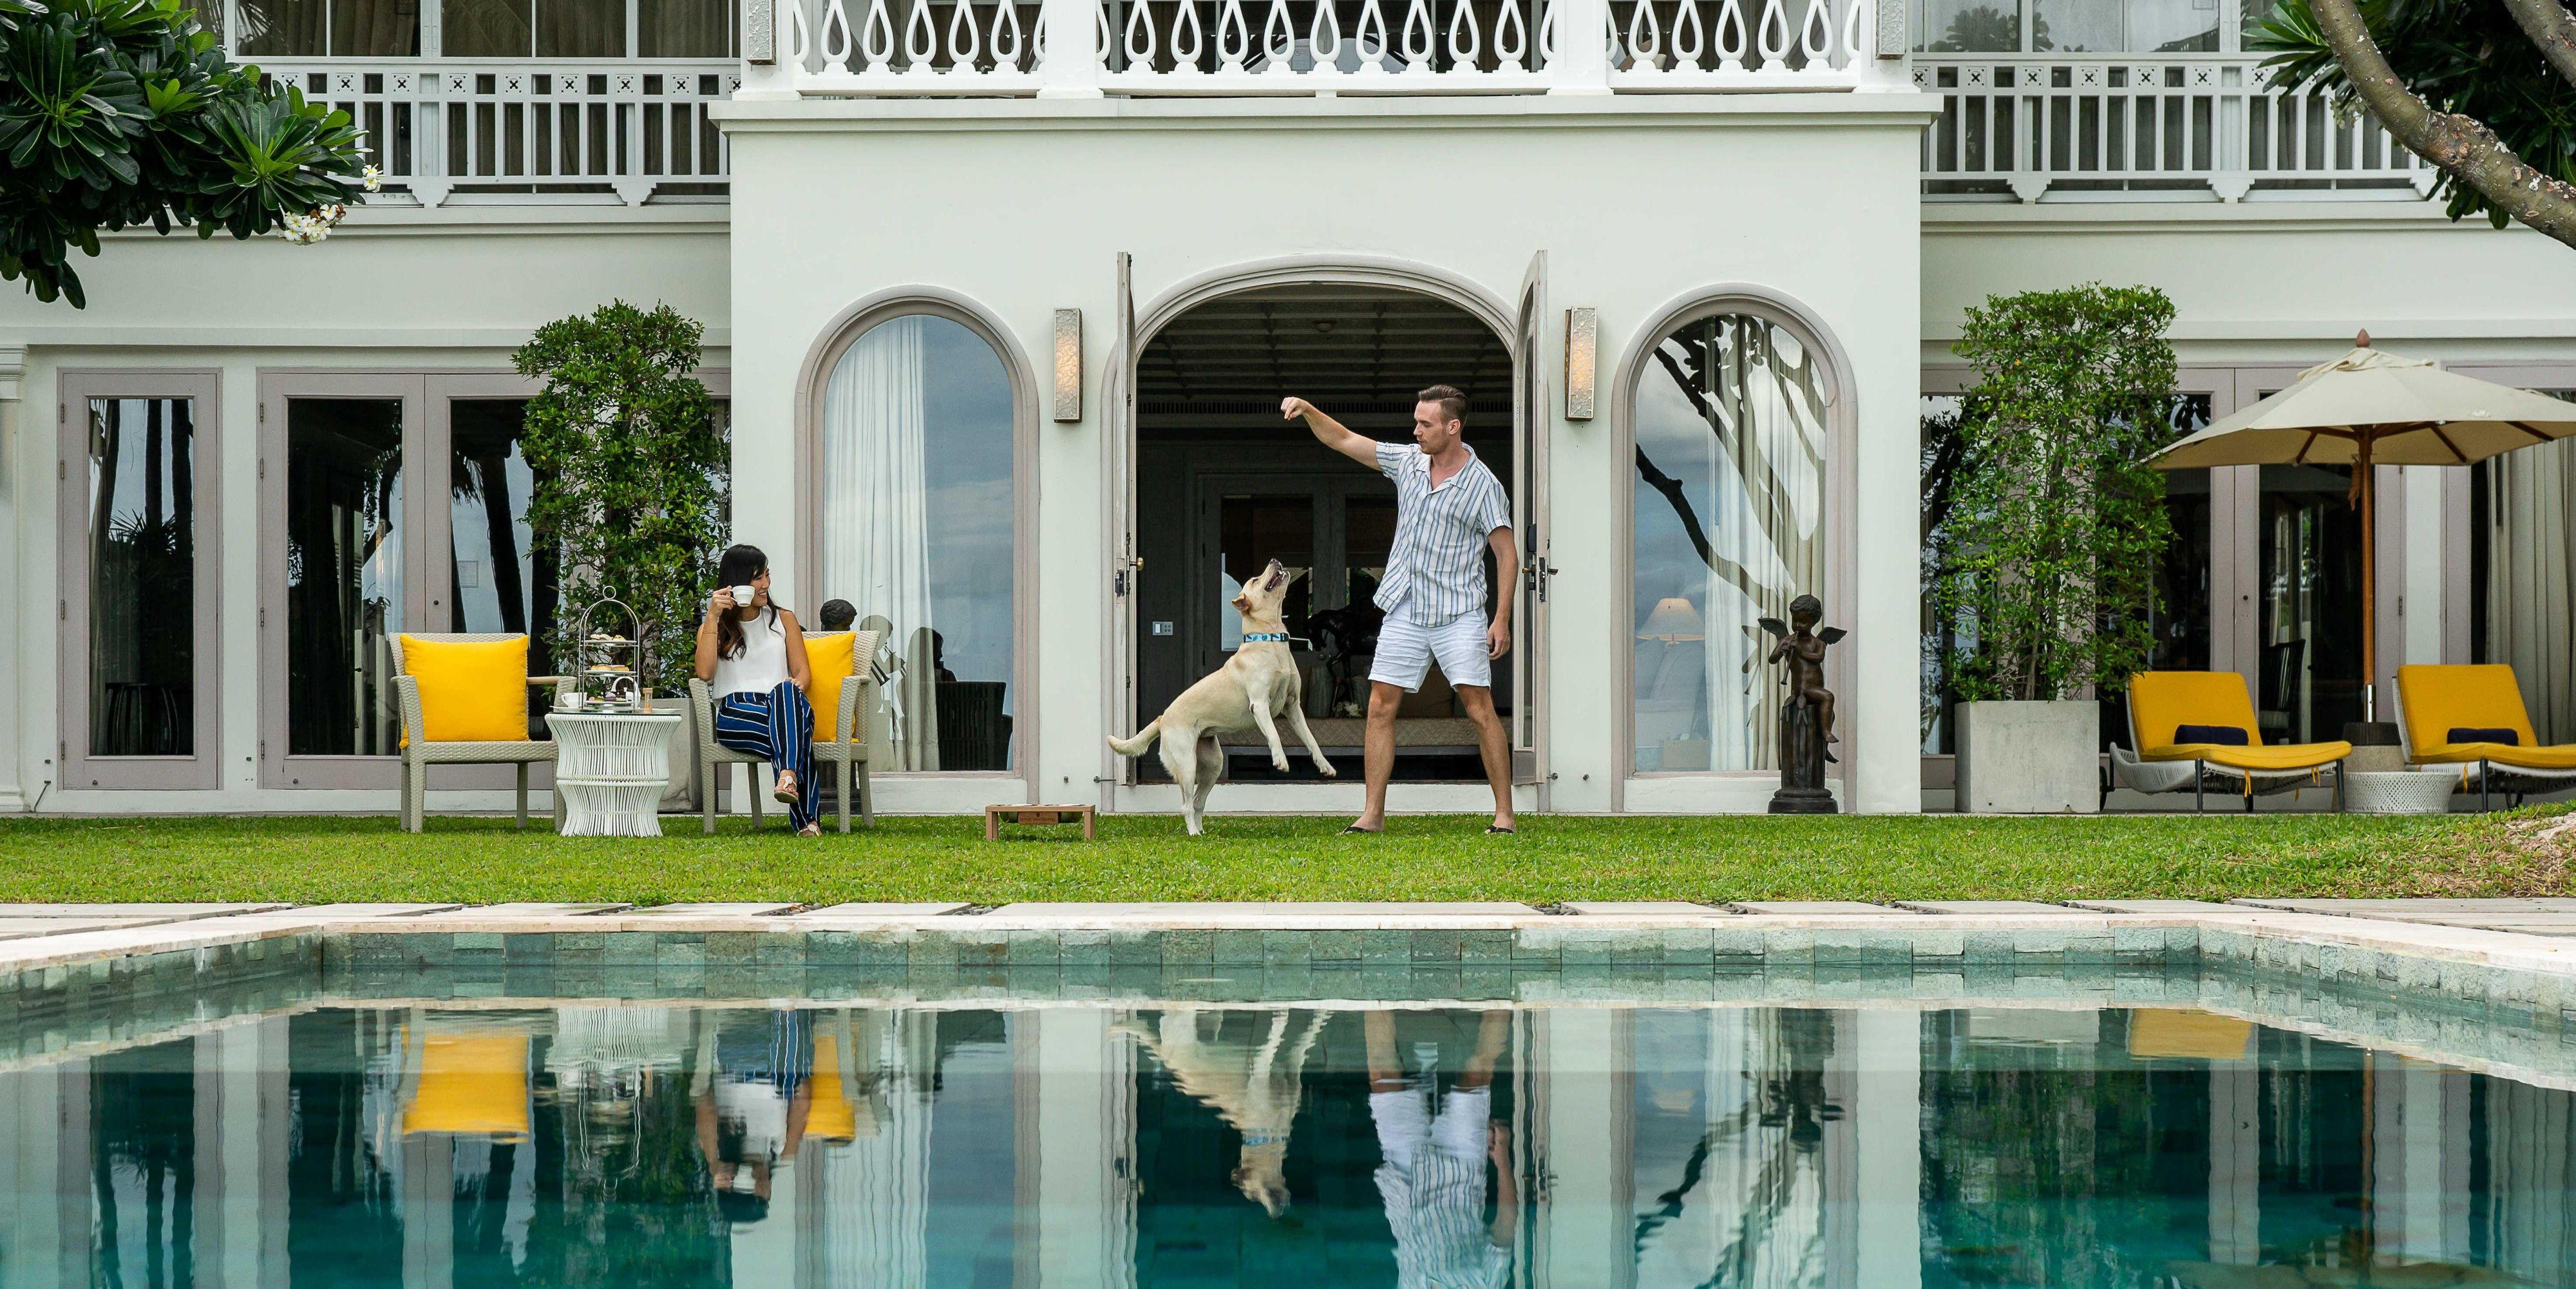 No more making arrangements before a holiday and worrying about your dog while away. Now they can be at your side while you enjoy our most exclusive and luxurious accommodation, featuring lush surrounding grounds, private pool and private beach access.